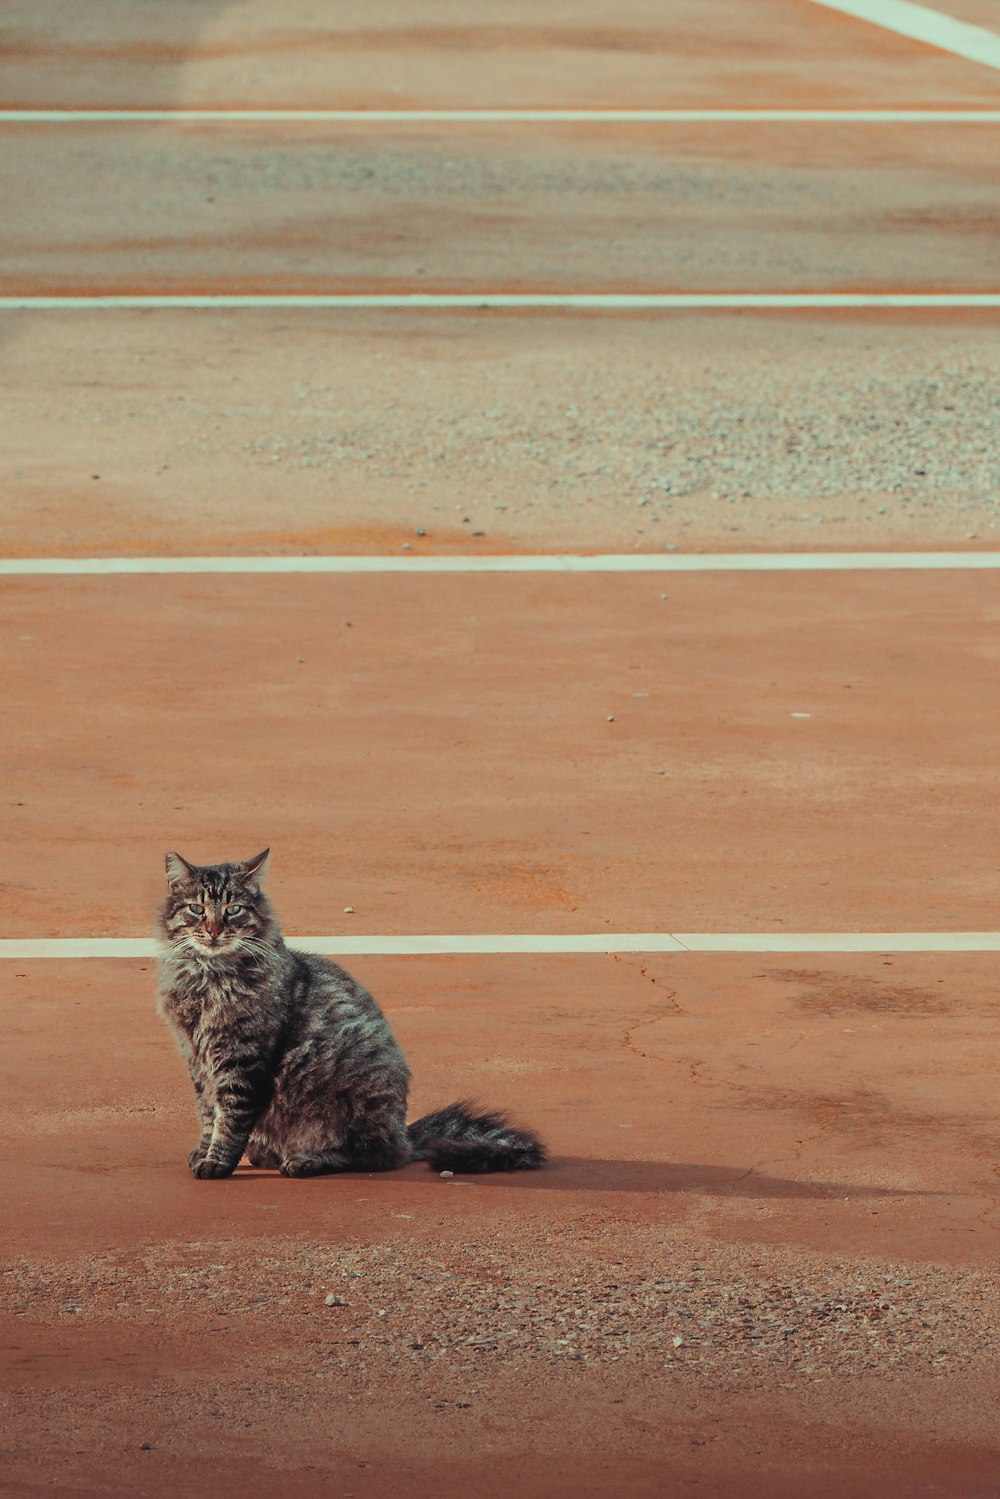 a cat sitting on the ground in a parking lot